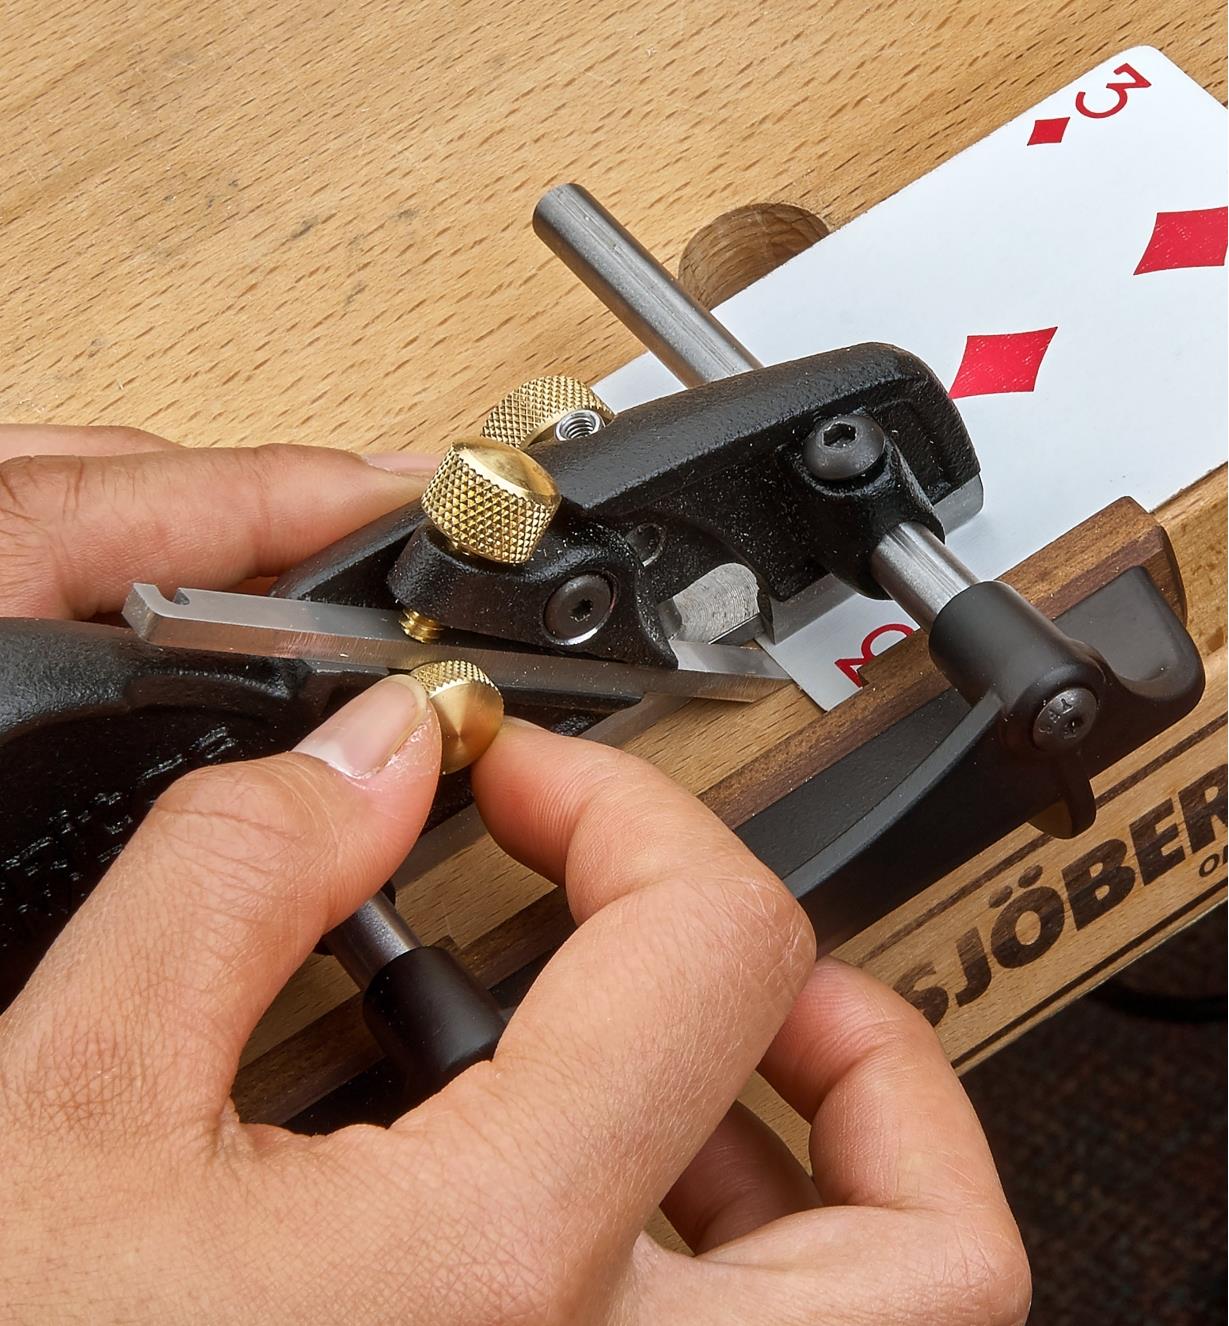 Setting blade projection on a box-maker’s plow plane, using a playing card as a shim under the skate